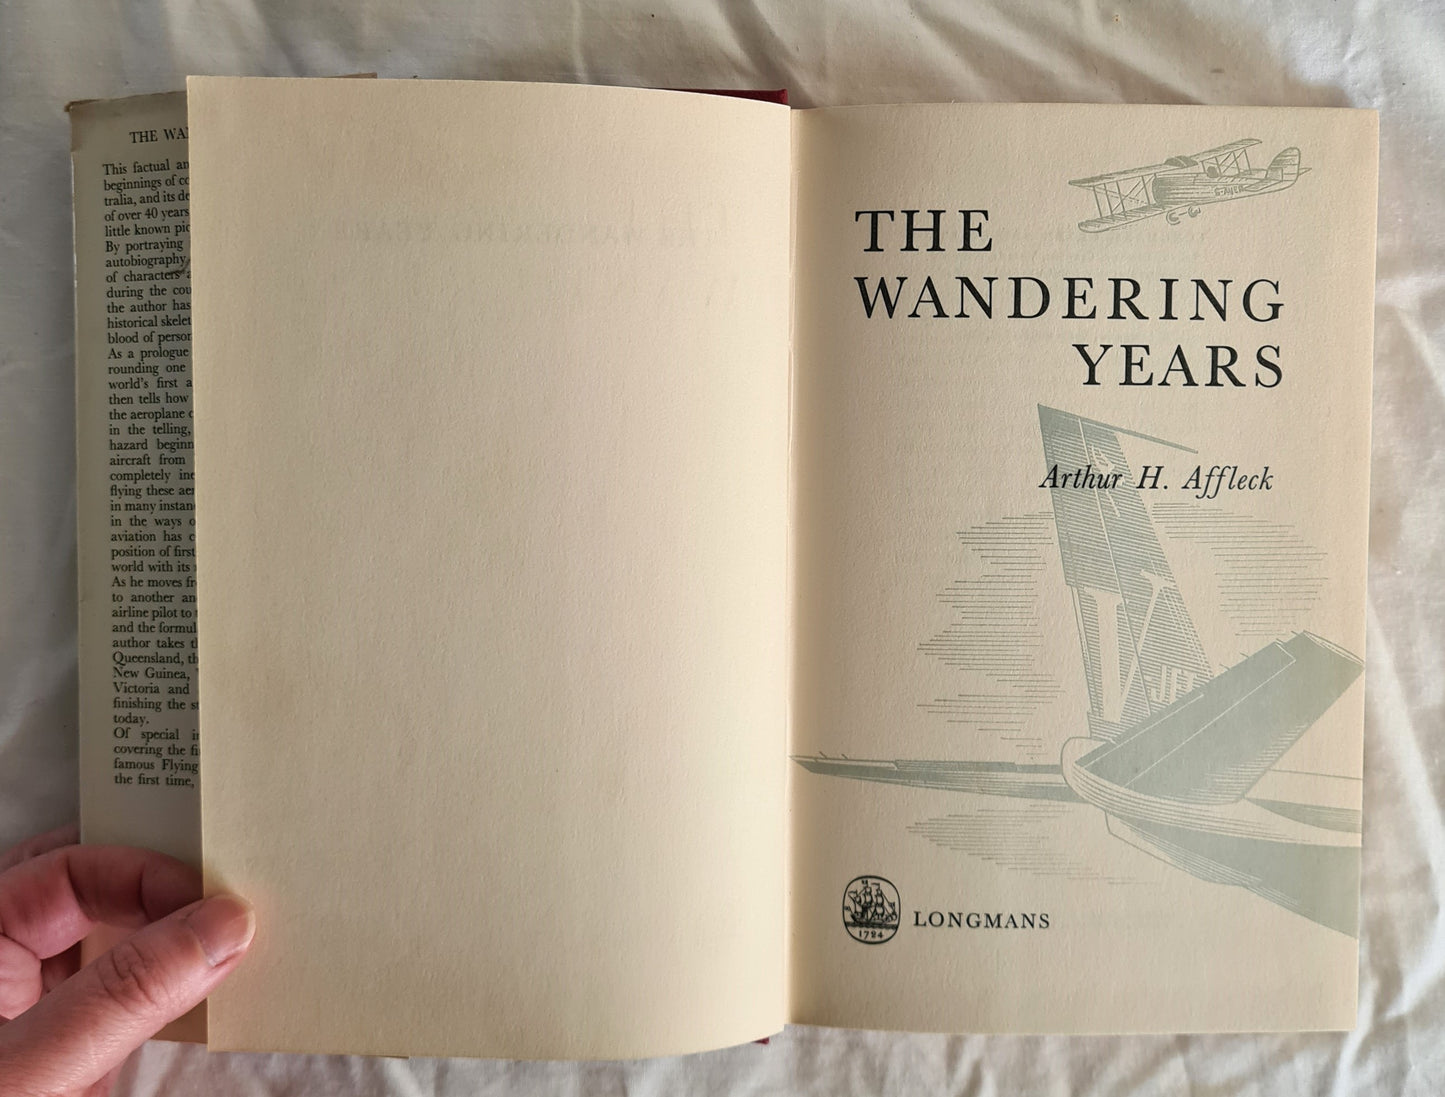 The Wandering Years by Arthur H. Affleck